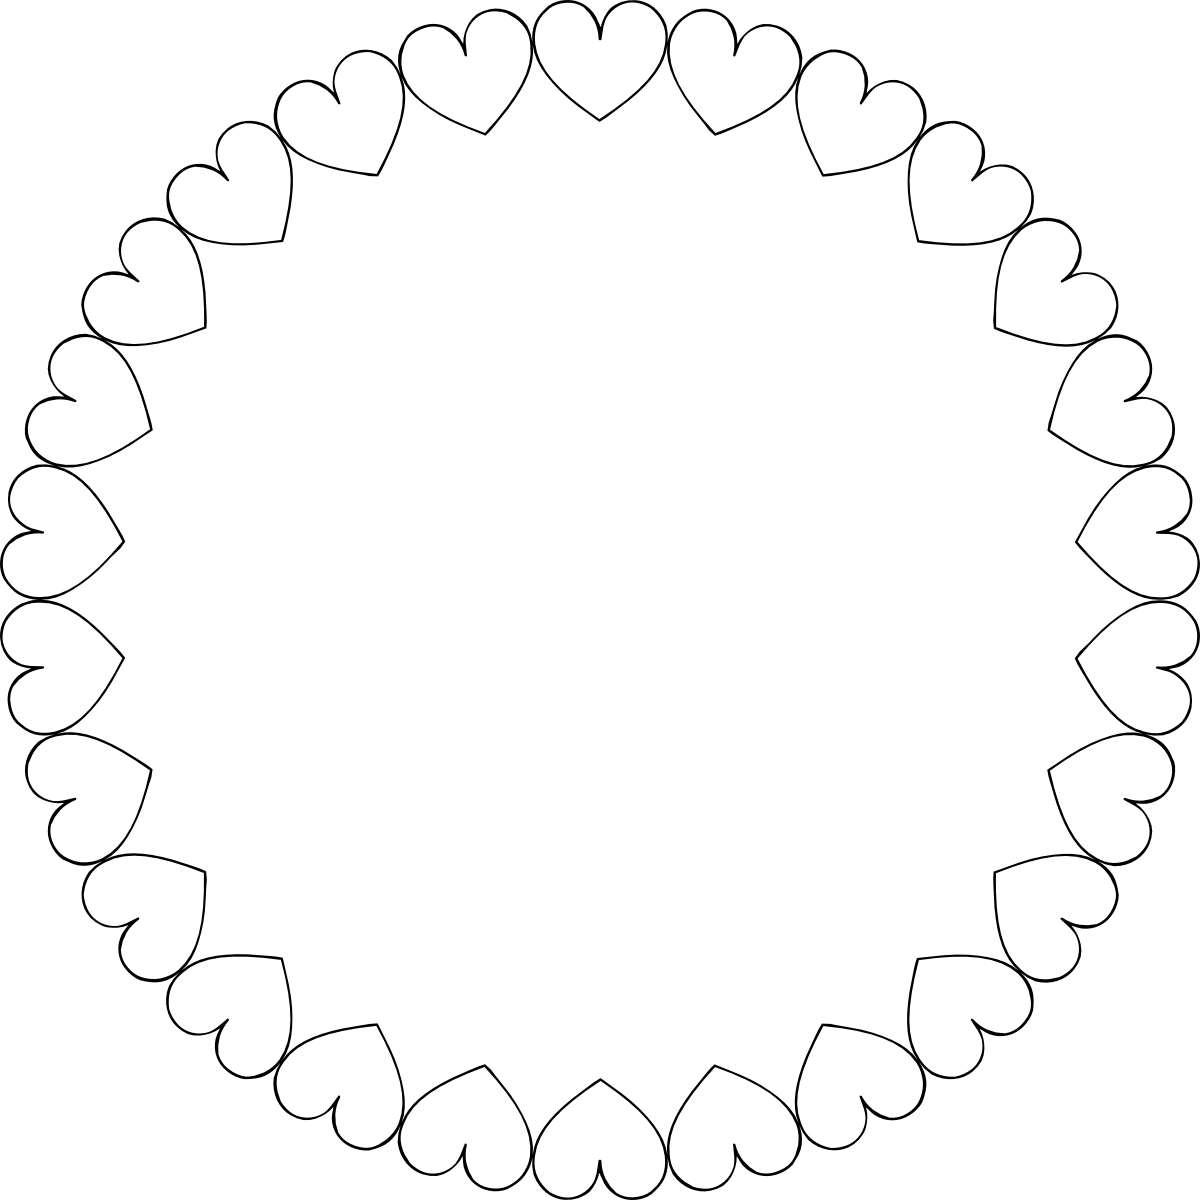 Round Heart Frame Coloring Pages | Coloring